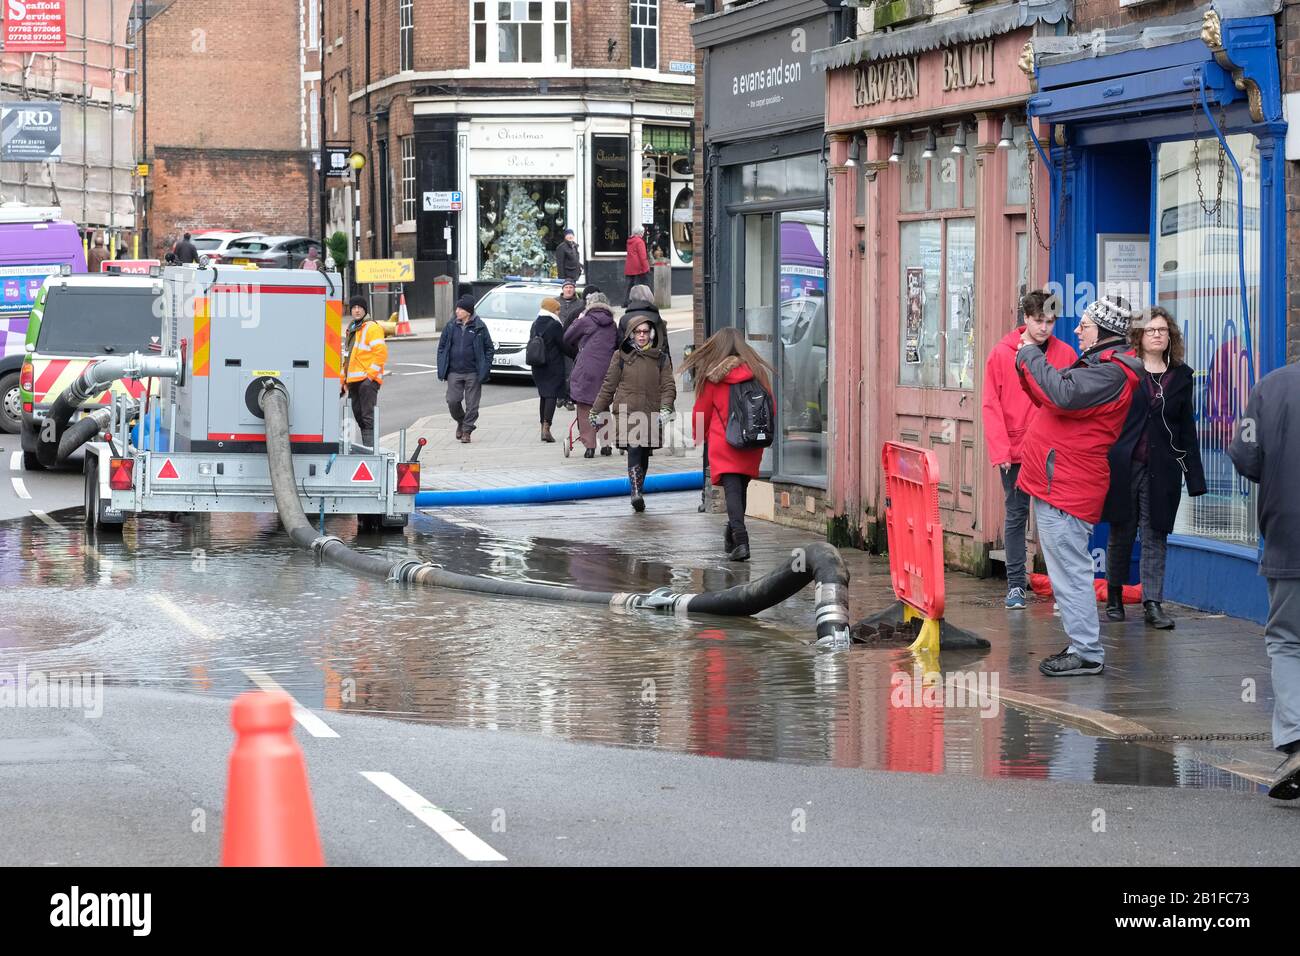 Shrewsbury, Shropshire, UK - Tuesday 25th February 2020 - Flooding in the city centre with an Environment Agency pump trying to control the puddle as shoppers pass by. The River Severn will peak later today and a Severe Flood Warning is currently in force for Shrewsbury. Photo Steven May / Alamy Live News Stock Photo